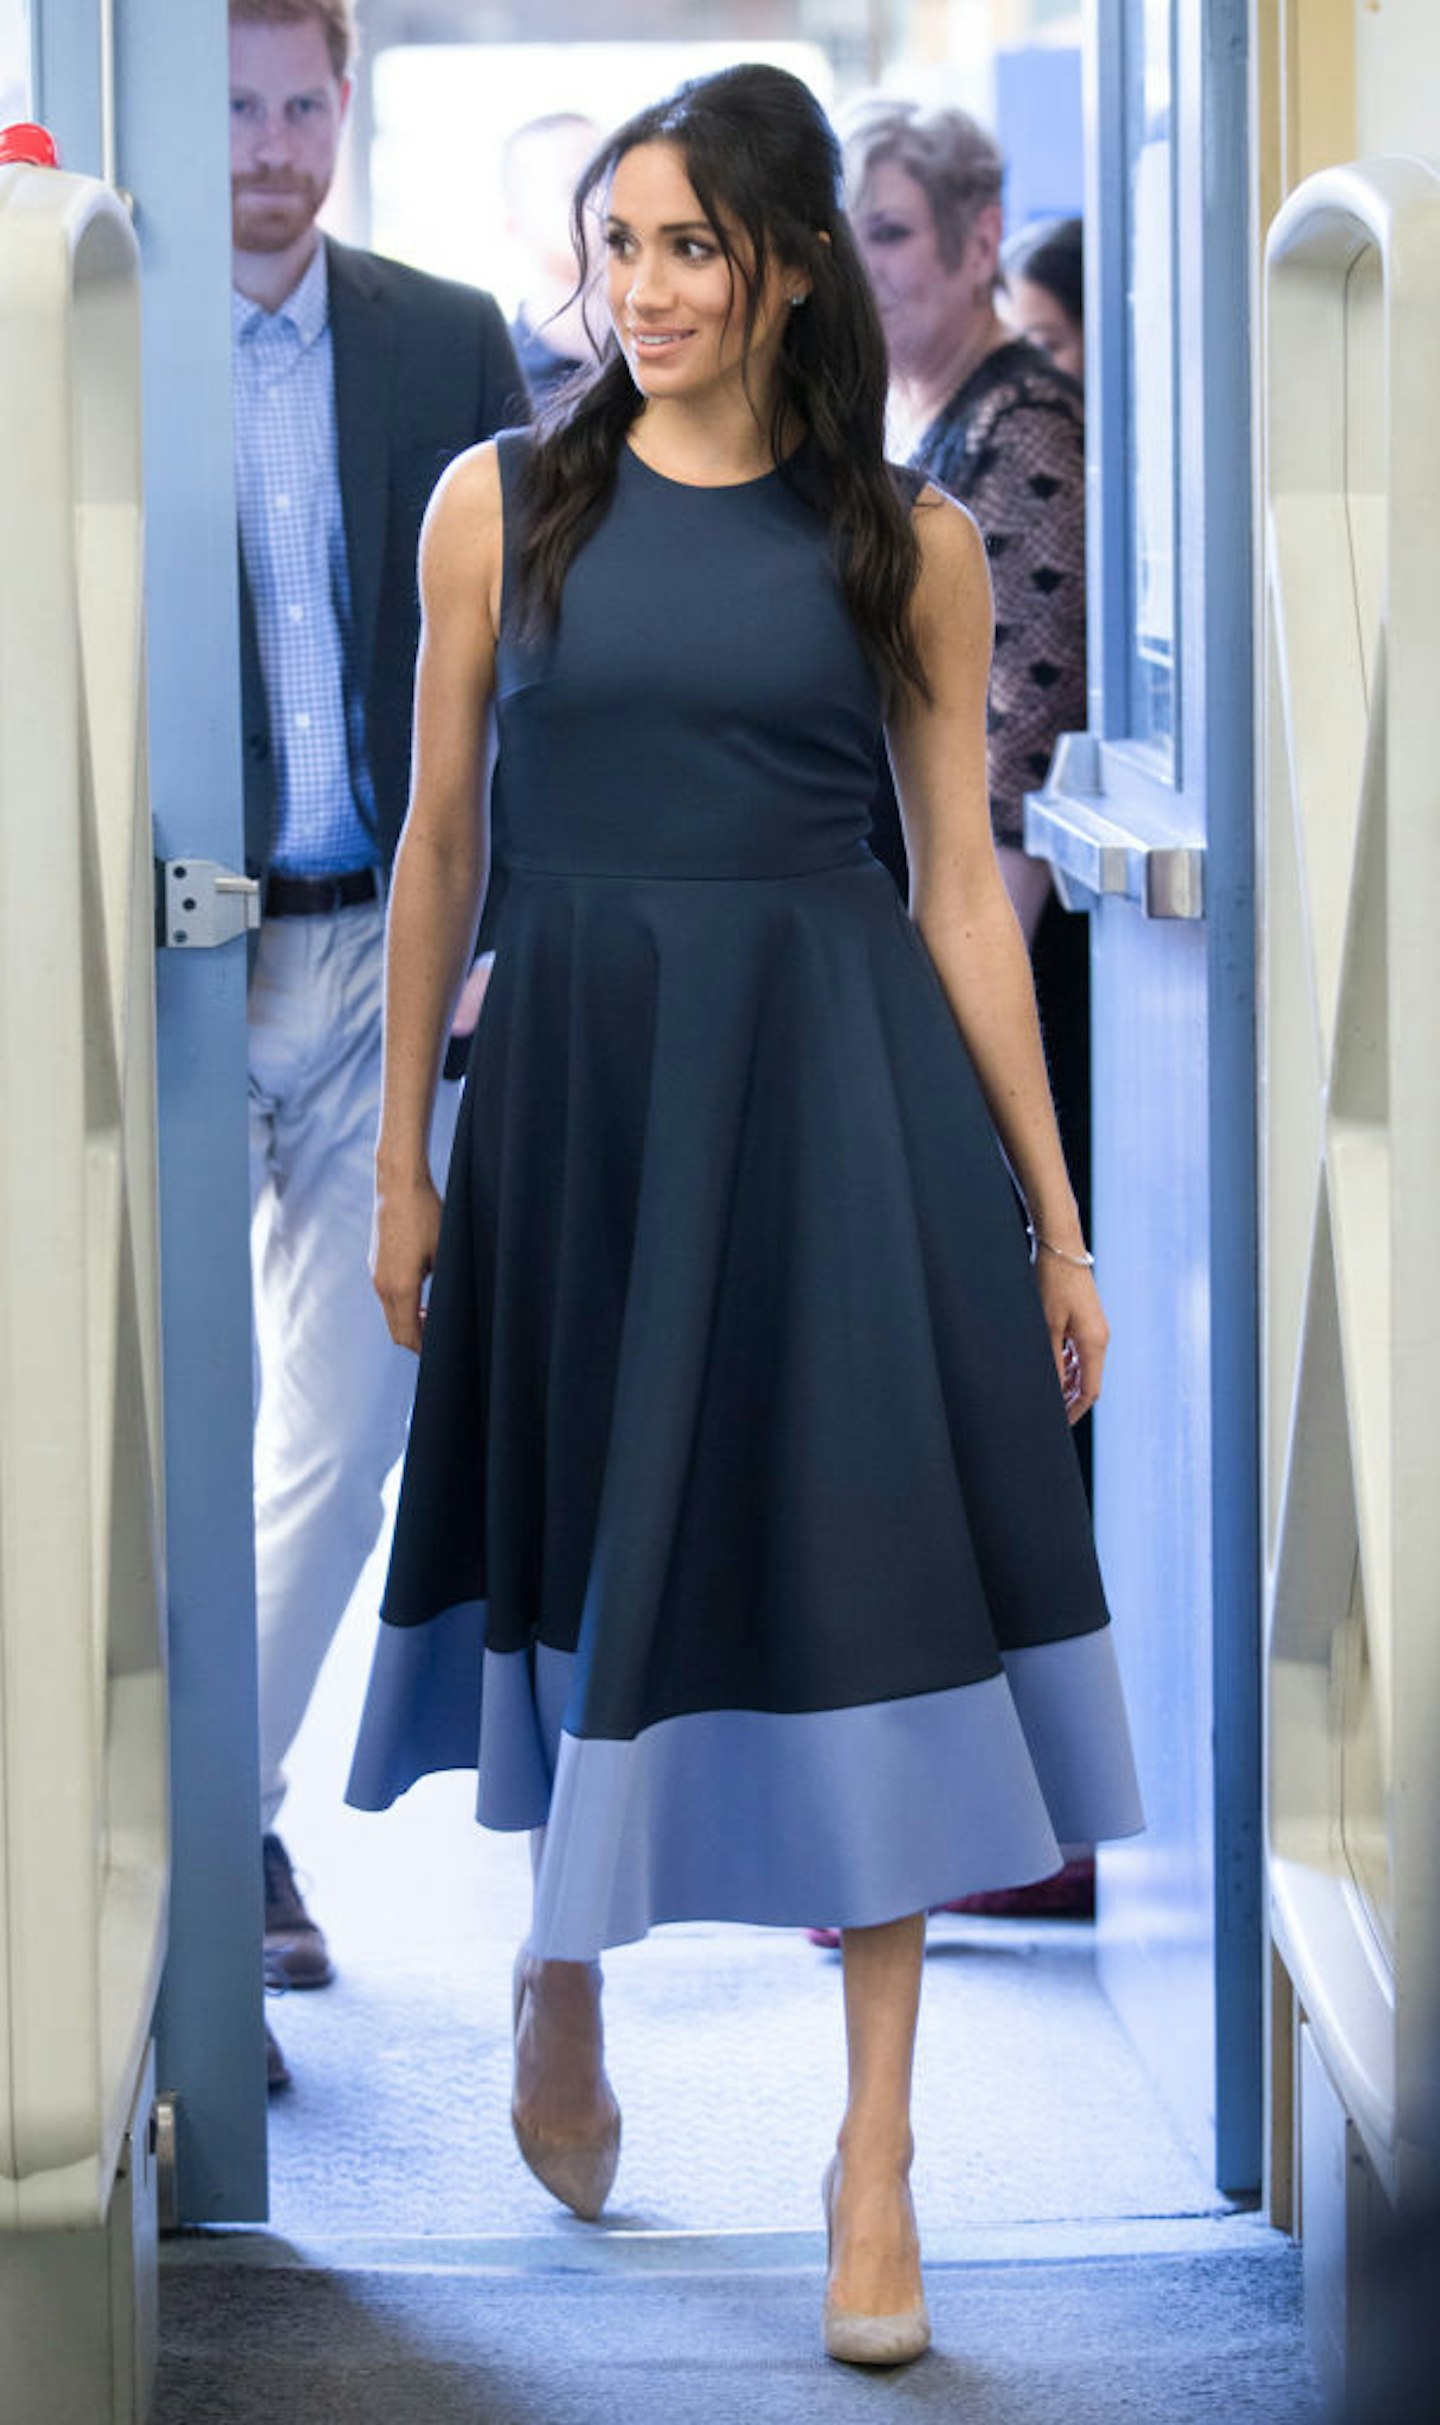 meghan markle outfit pregnancy